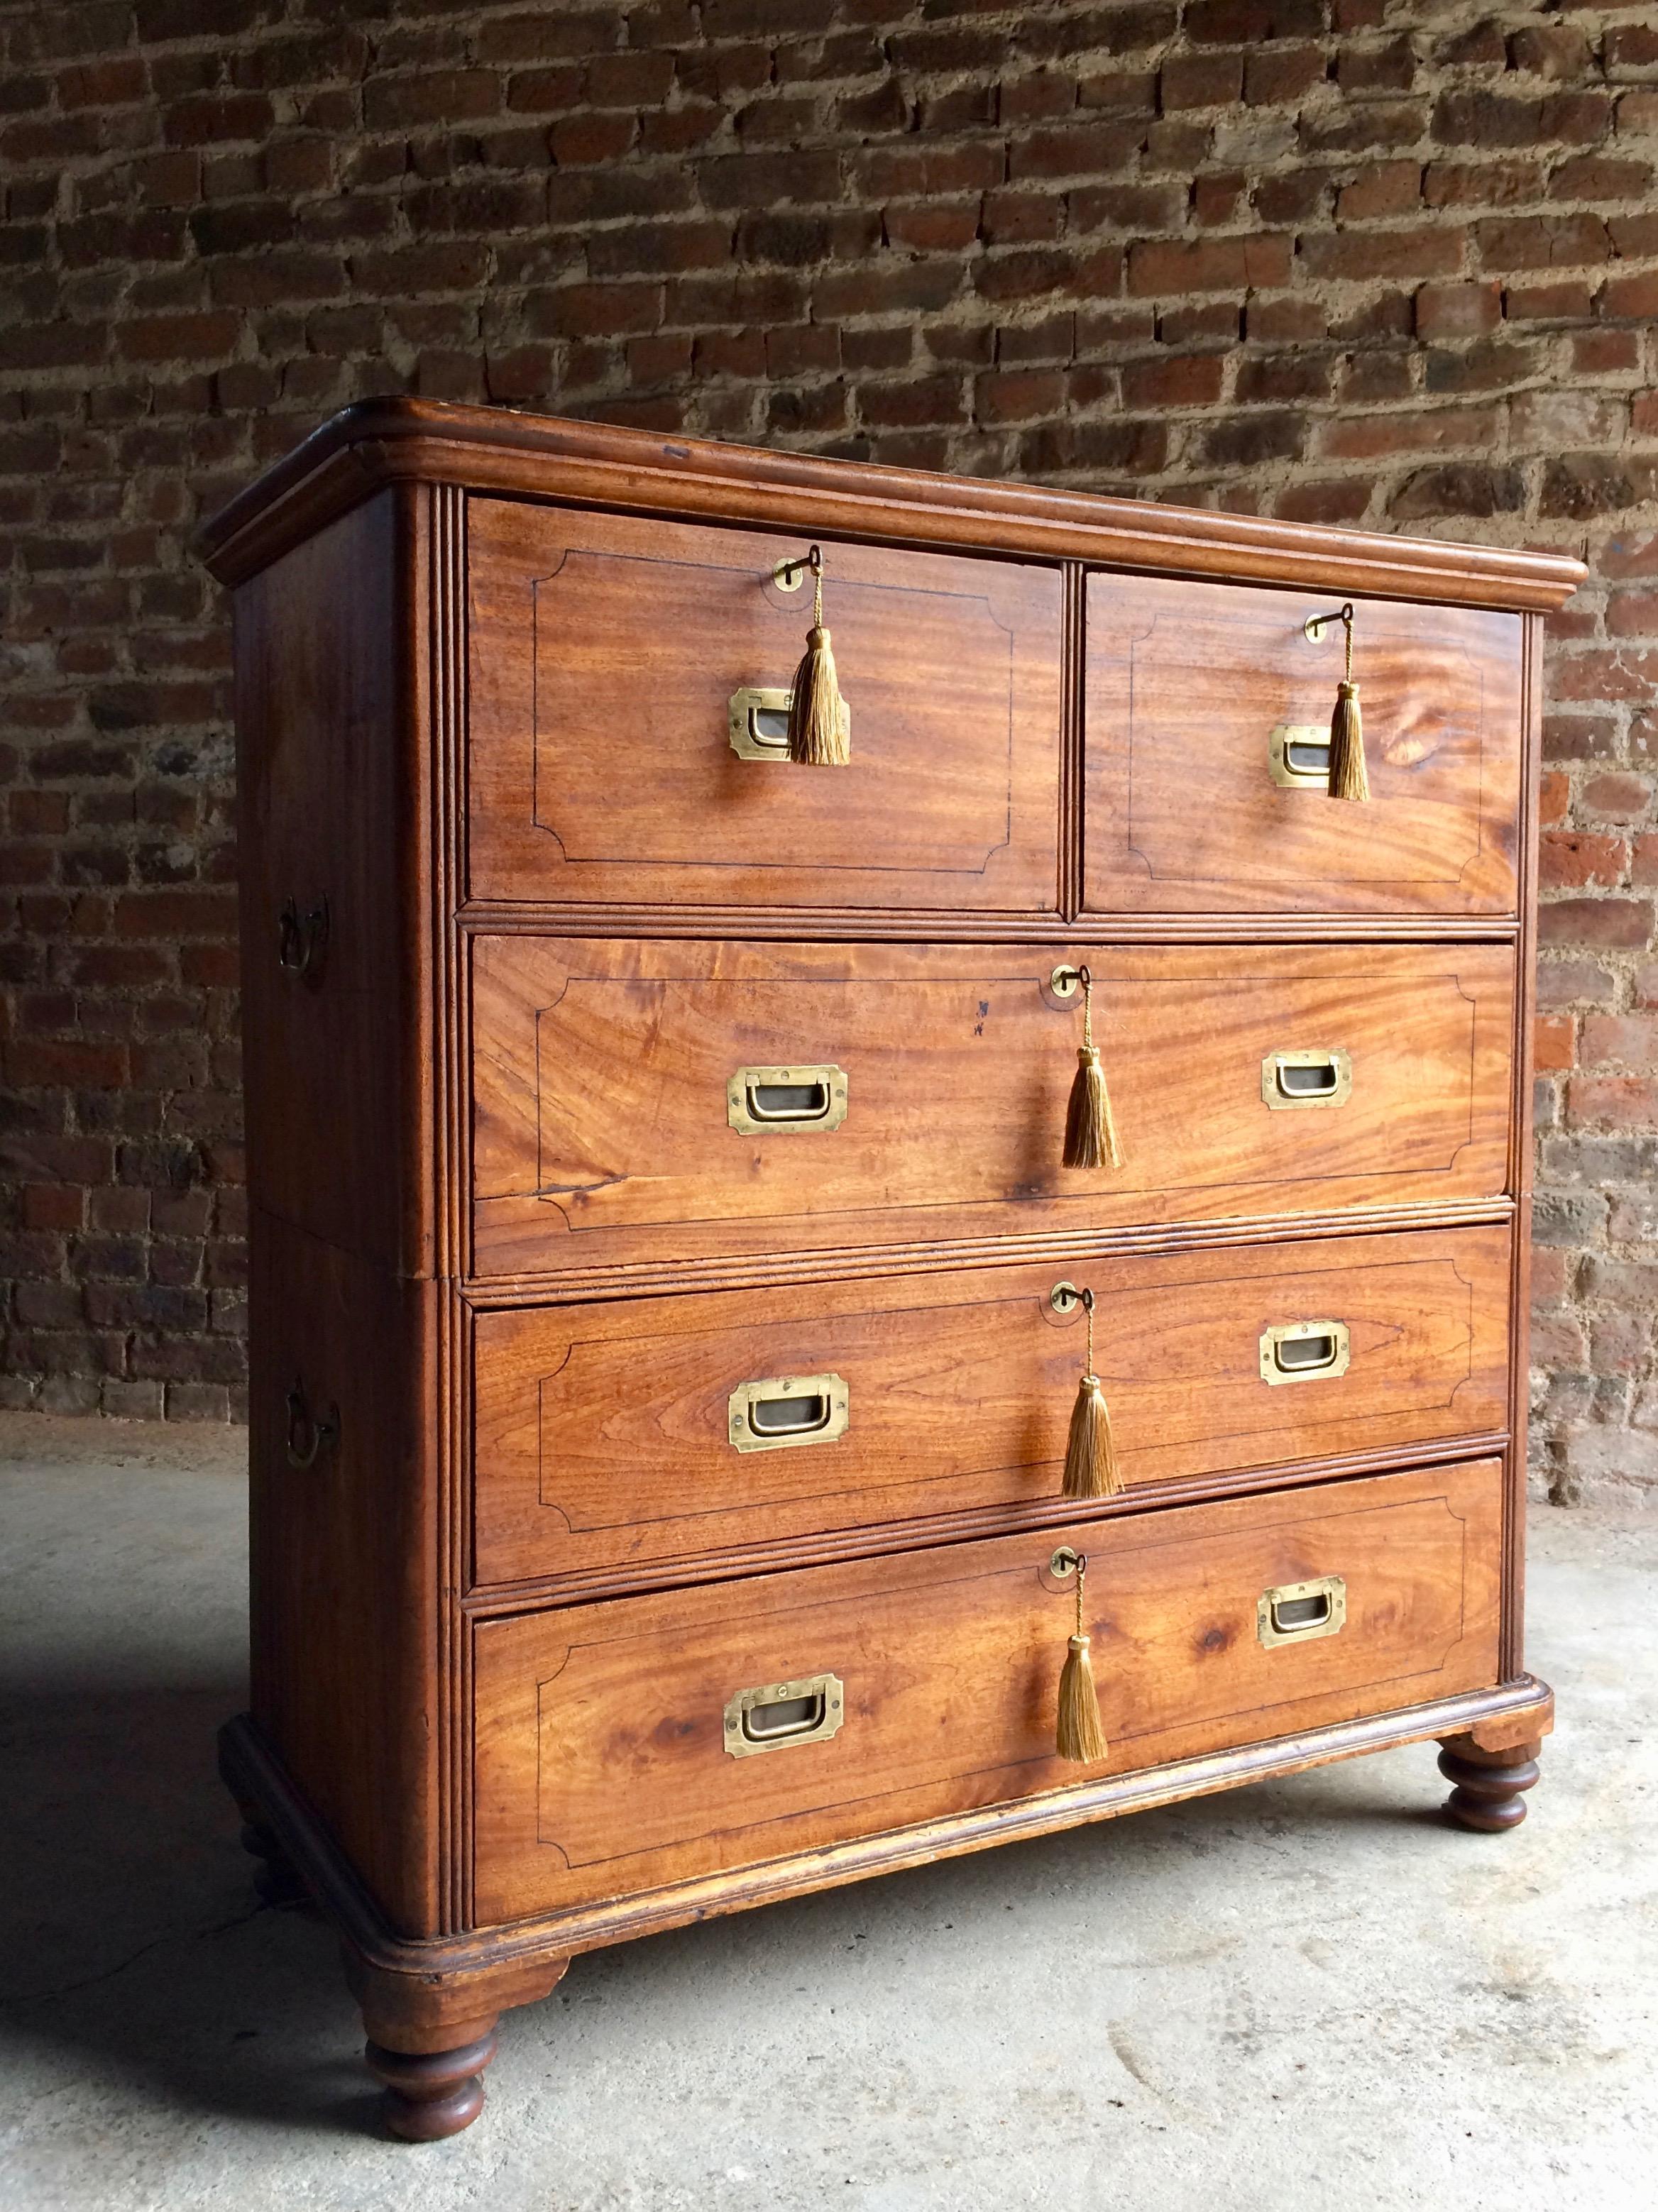 Antique Colonial Campaign Chest of Drawers Dresser Camphor Wood Victorian No.11 In Distressed Condition In Longdon, Tewkesbury